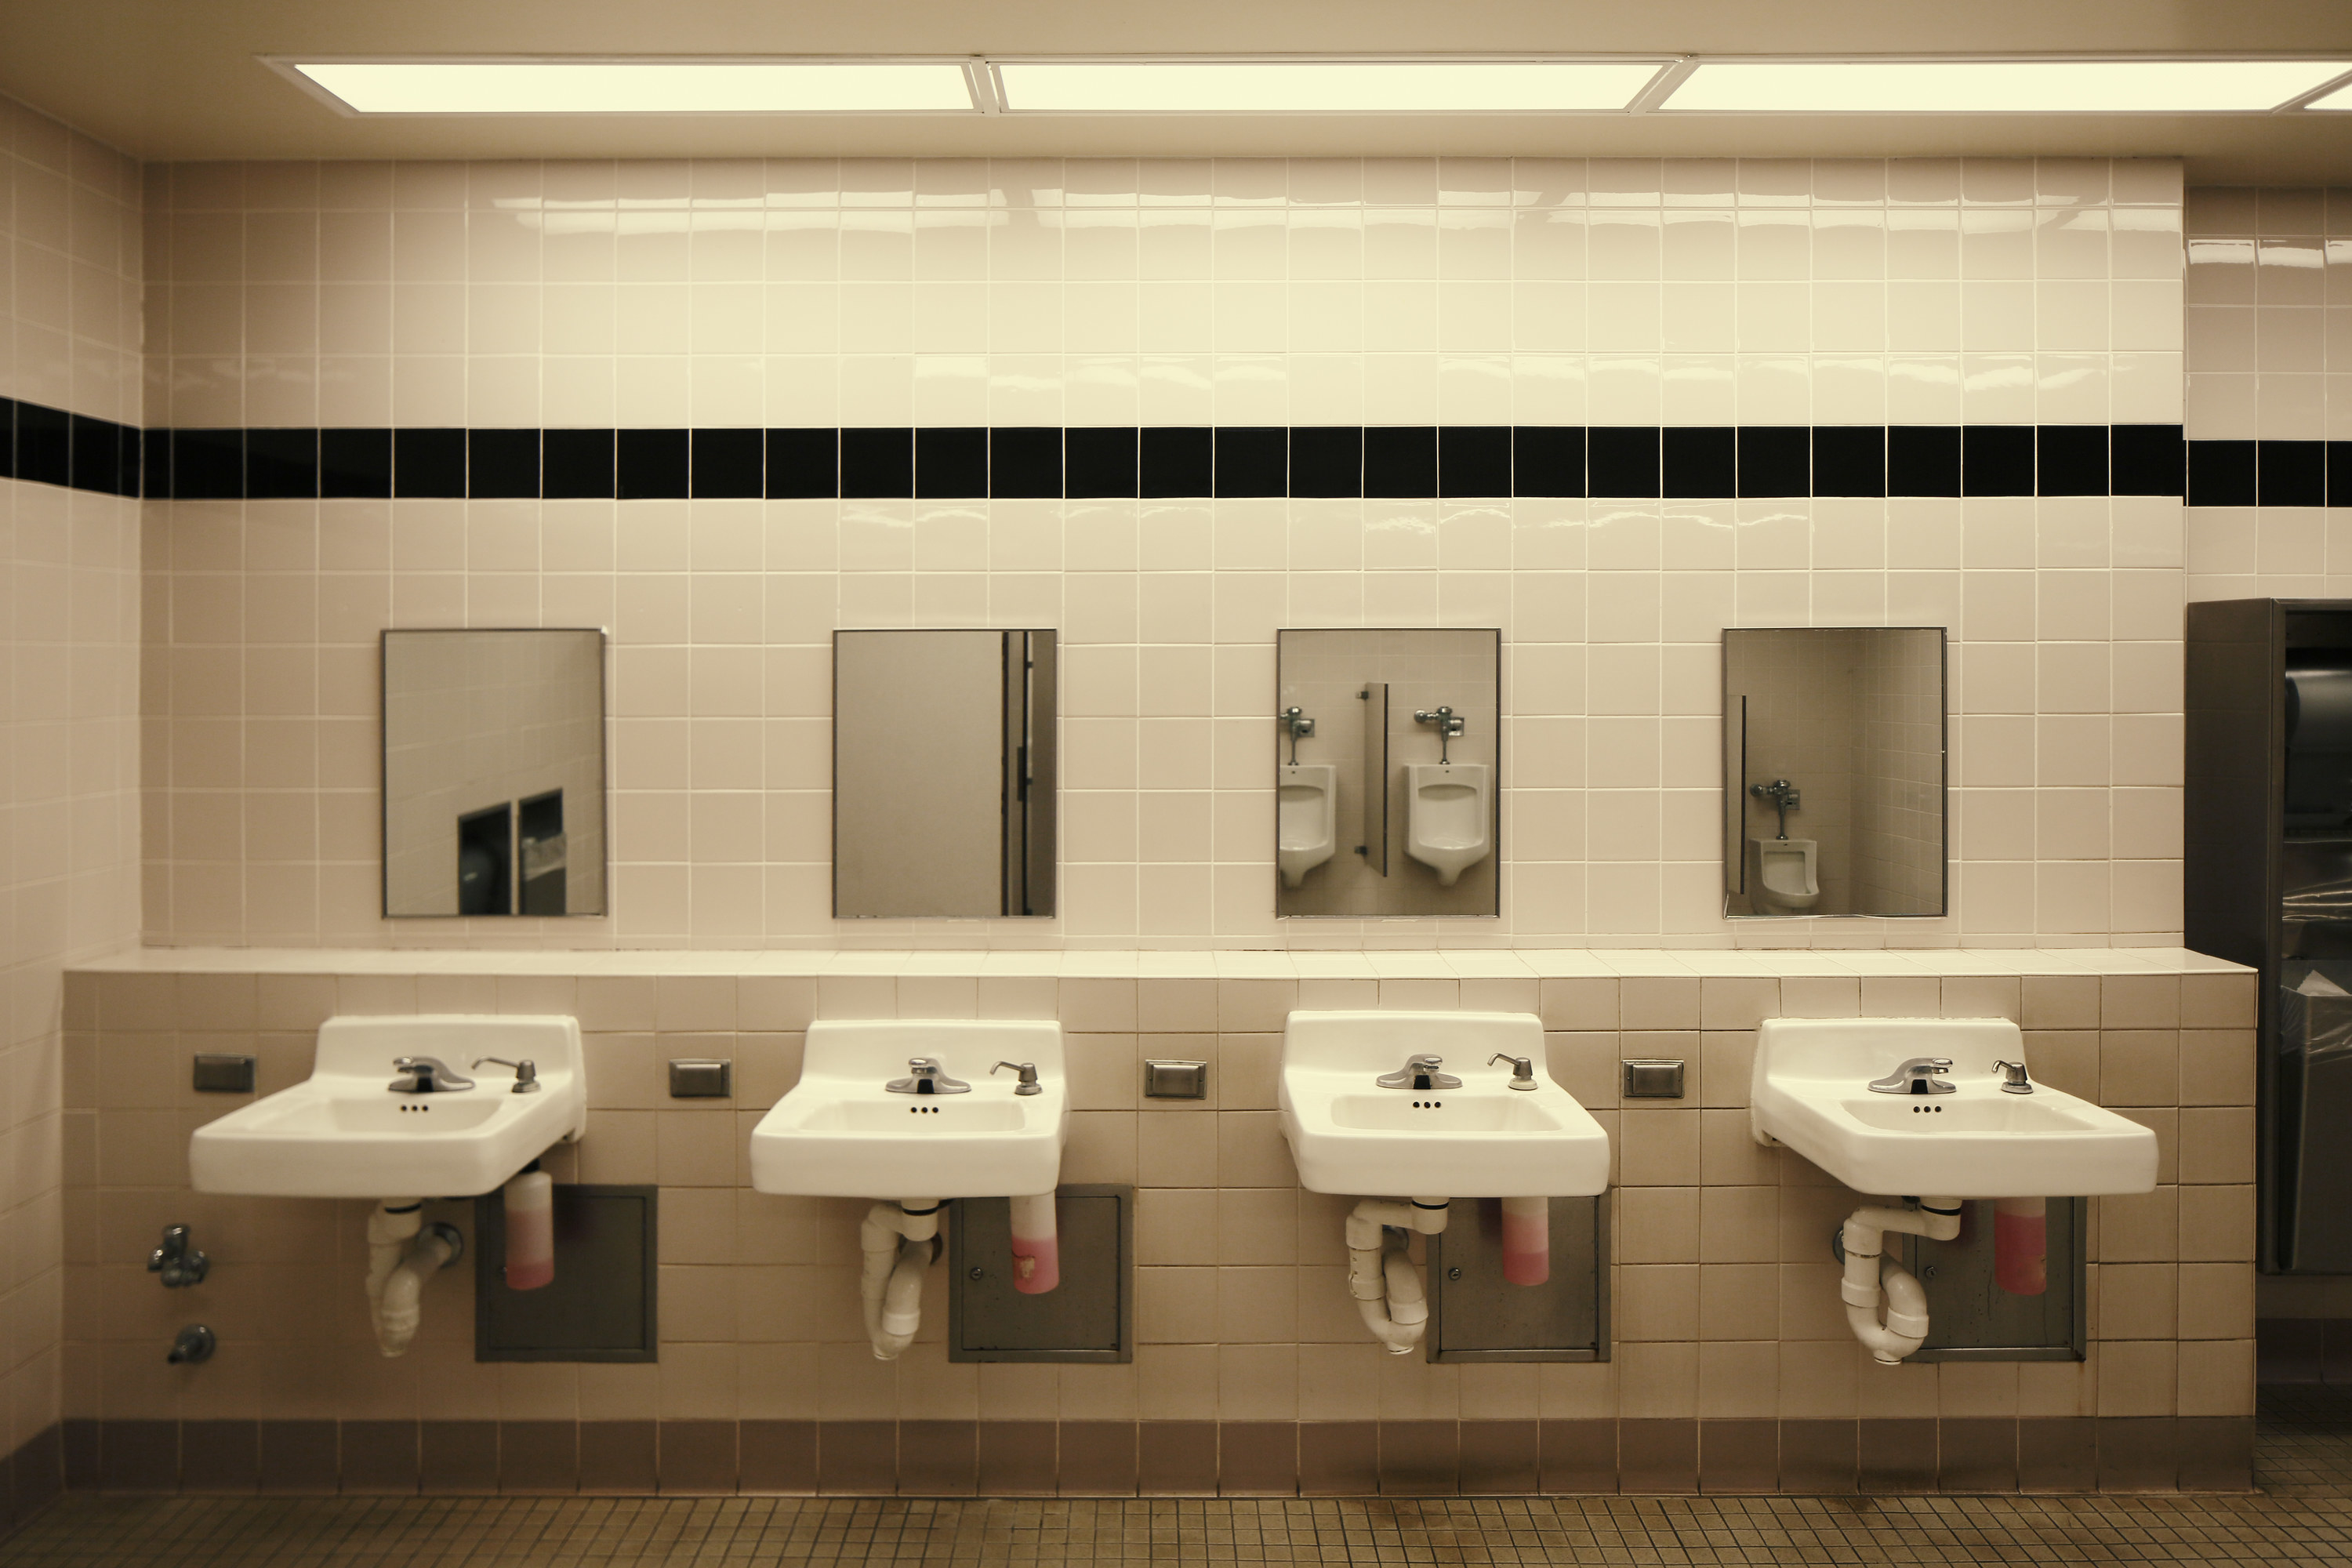 Line of sinks and mirrors in a public bathroom